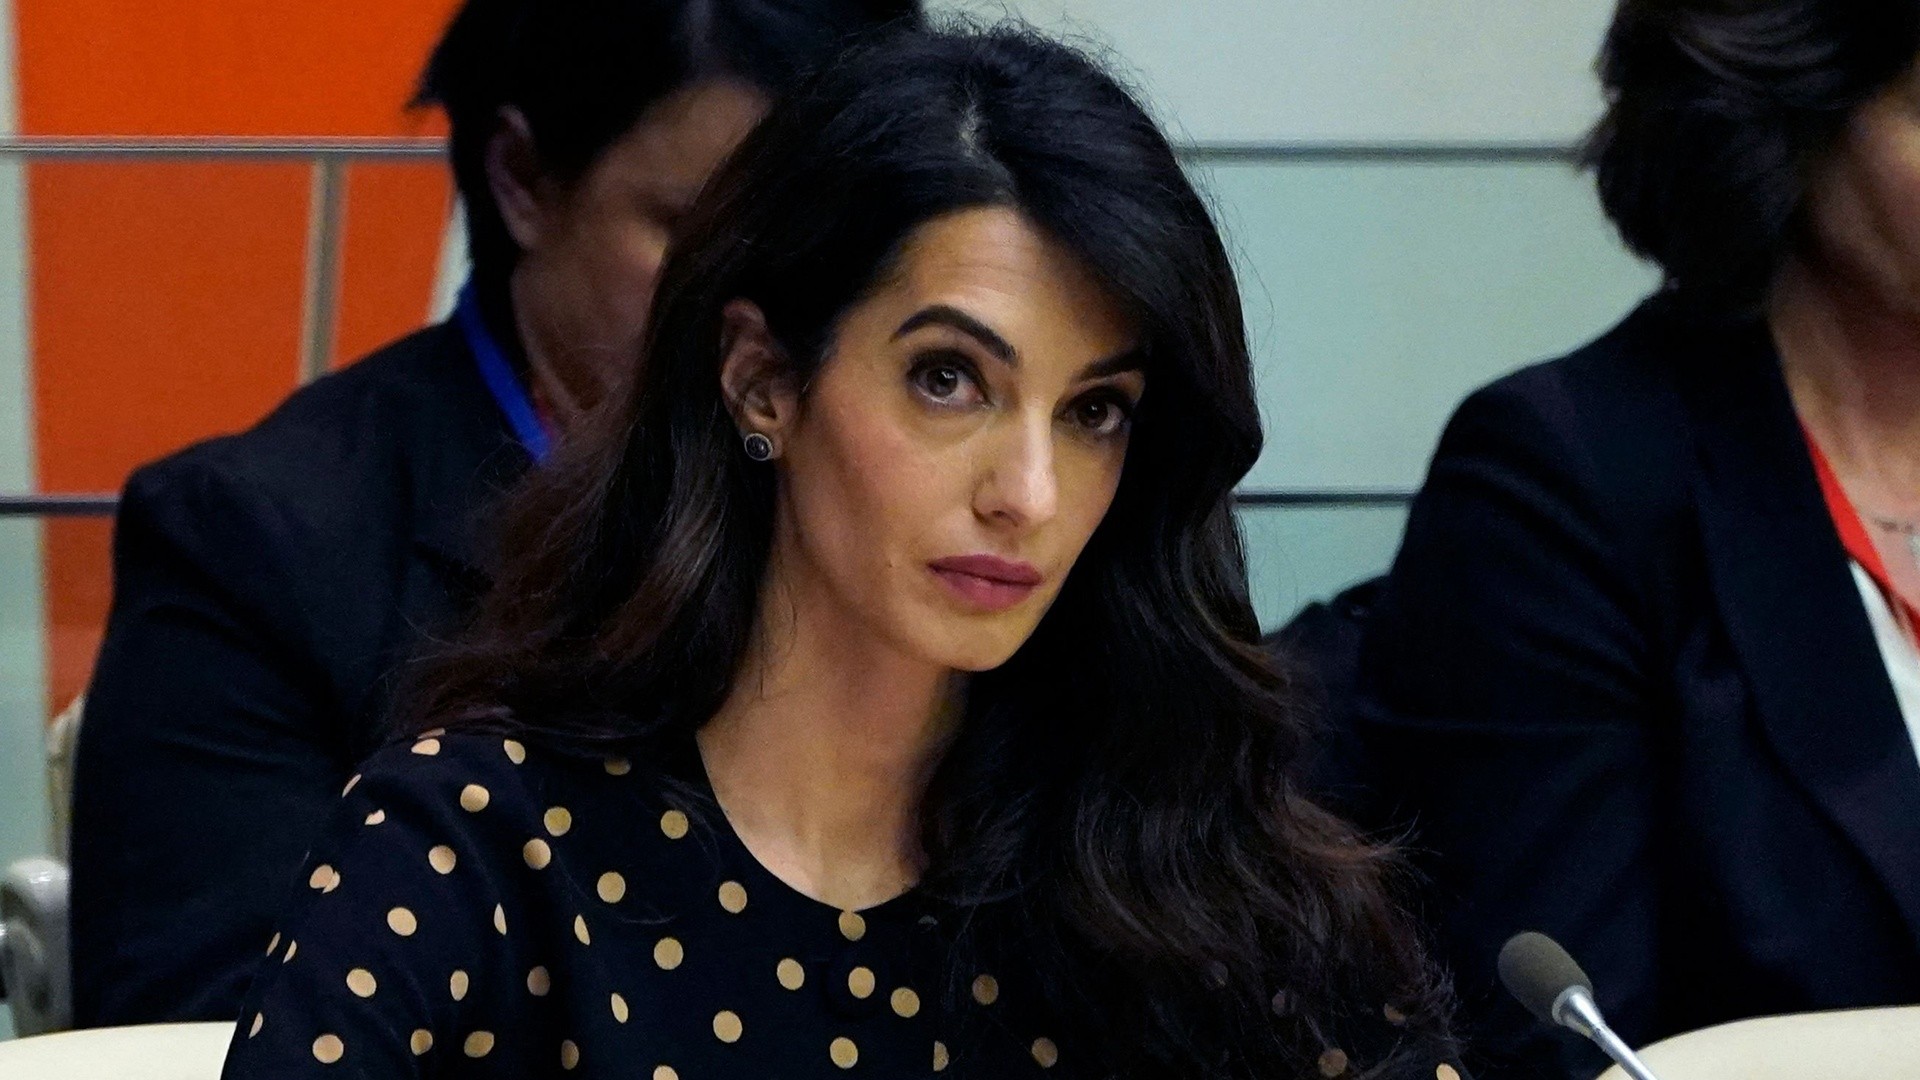 Amal Clooney Wallpapers